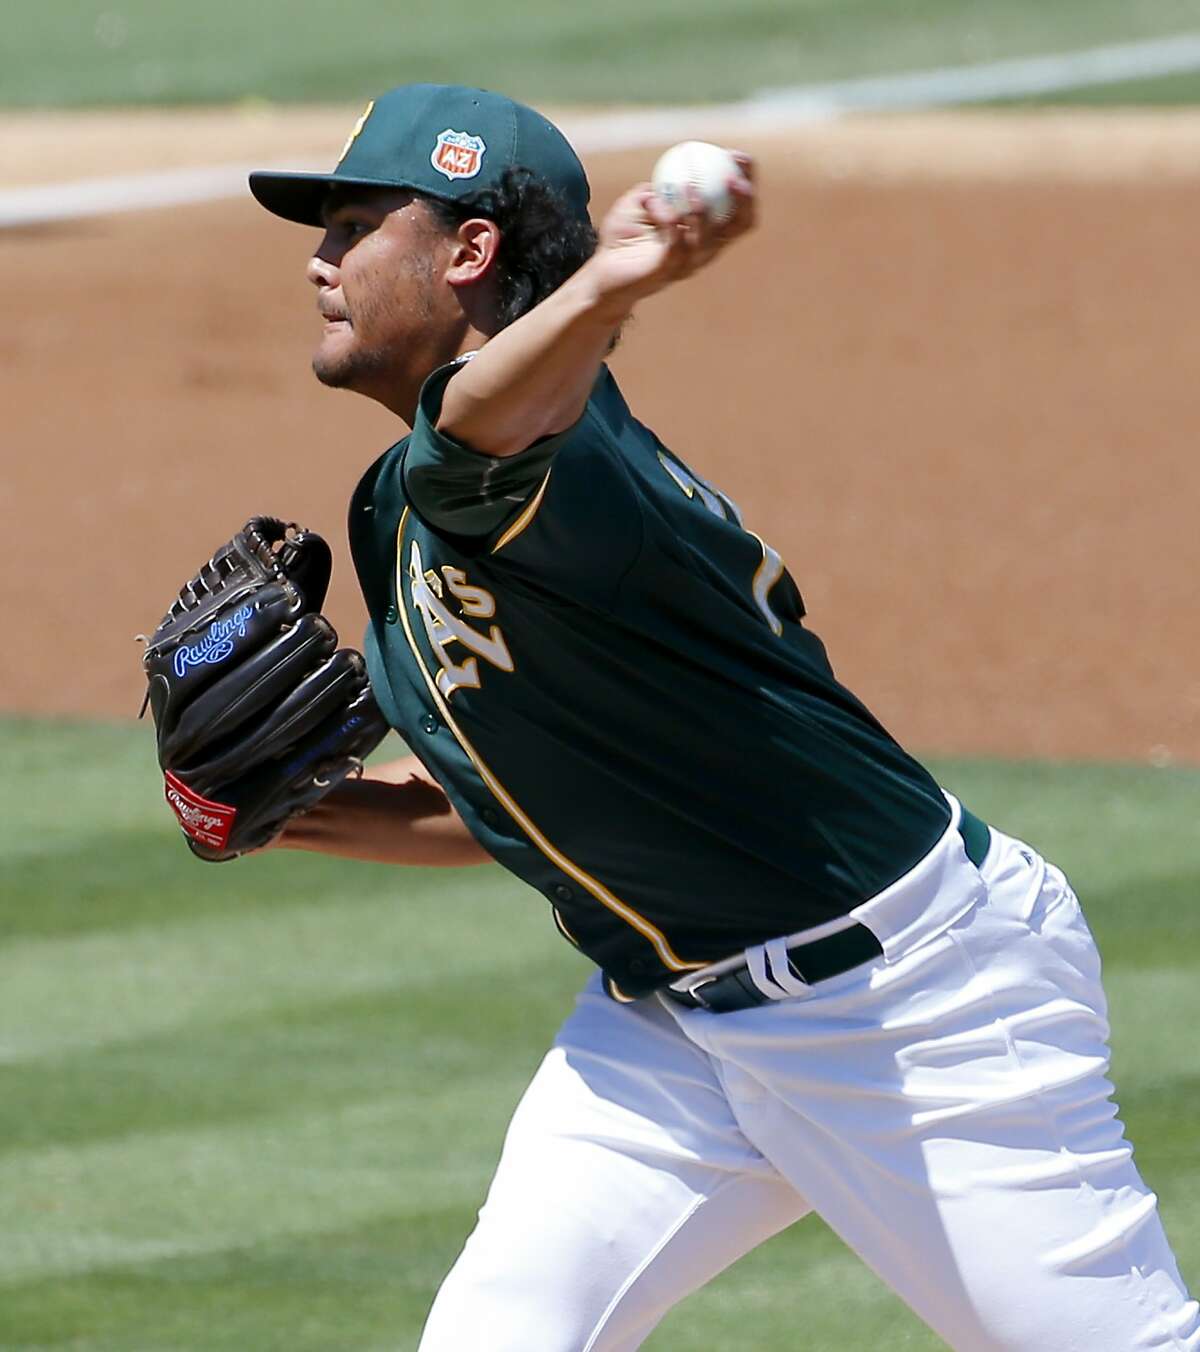 Oakland A's pitcher Sean Manaea throws against the Los Angeles Angels during the first inning of a spring training baseball game, Friday, March 25, 2016, in Mesa, Ariz. (AP Photo/Matt York)